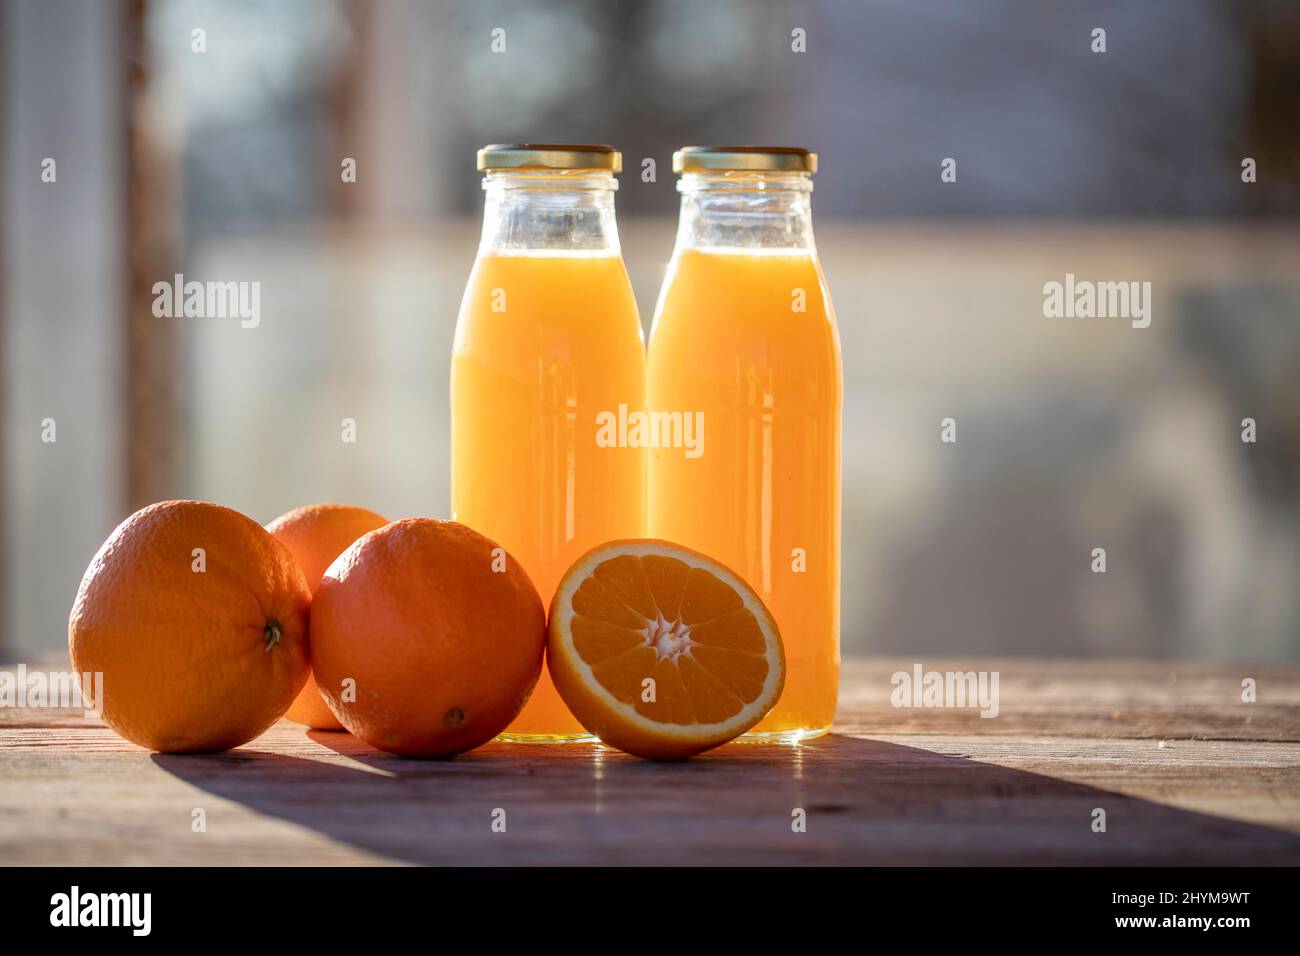 https://c8.alamy.com/comp/2HYM9WT/orange-juice-organic-homemade-freshly-squeezed-in-bottle-next-to-oranges-in-the-morning-sun-2HYM9WT.jpg